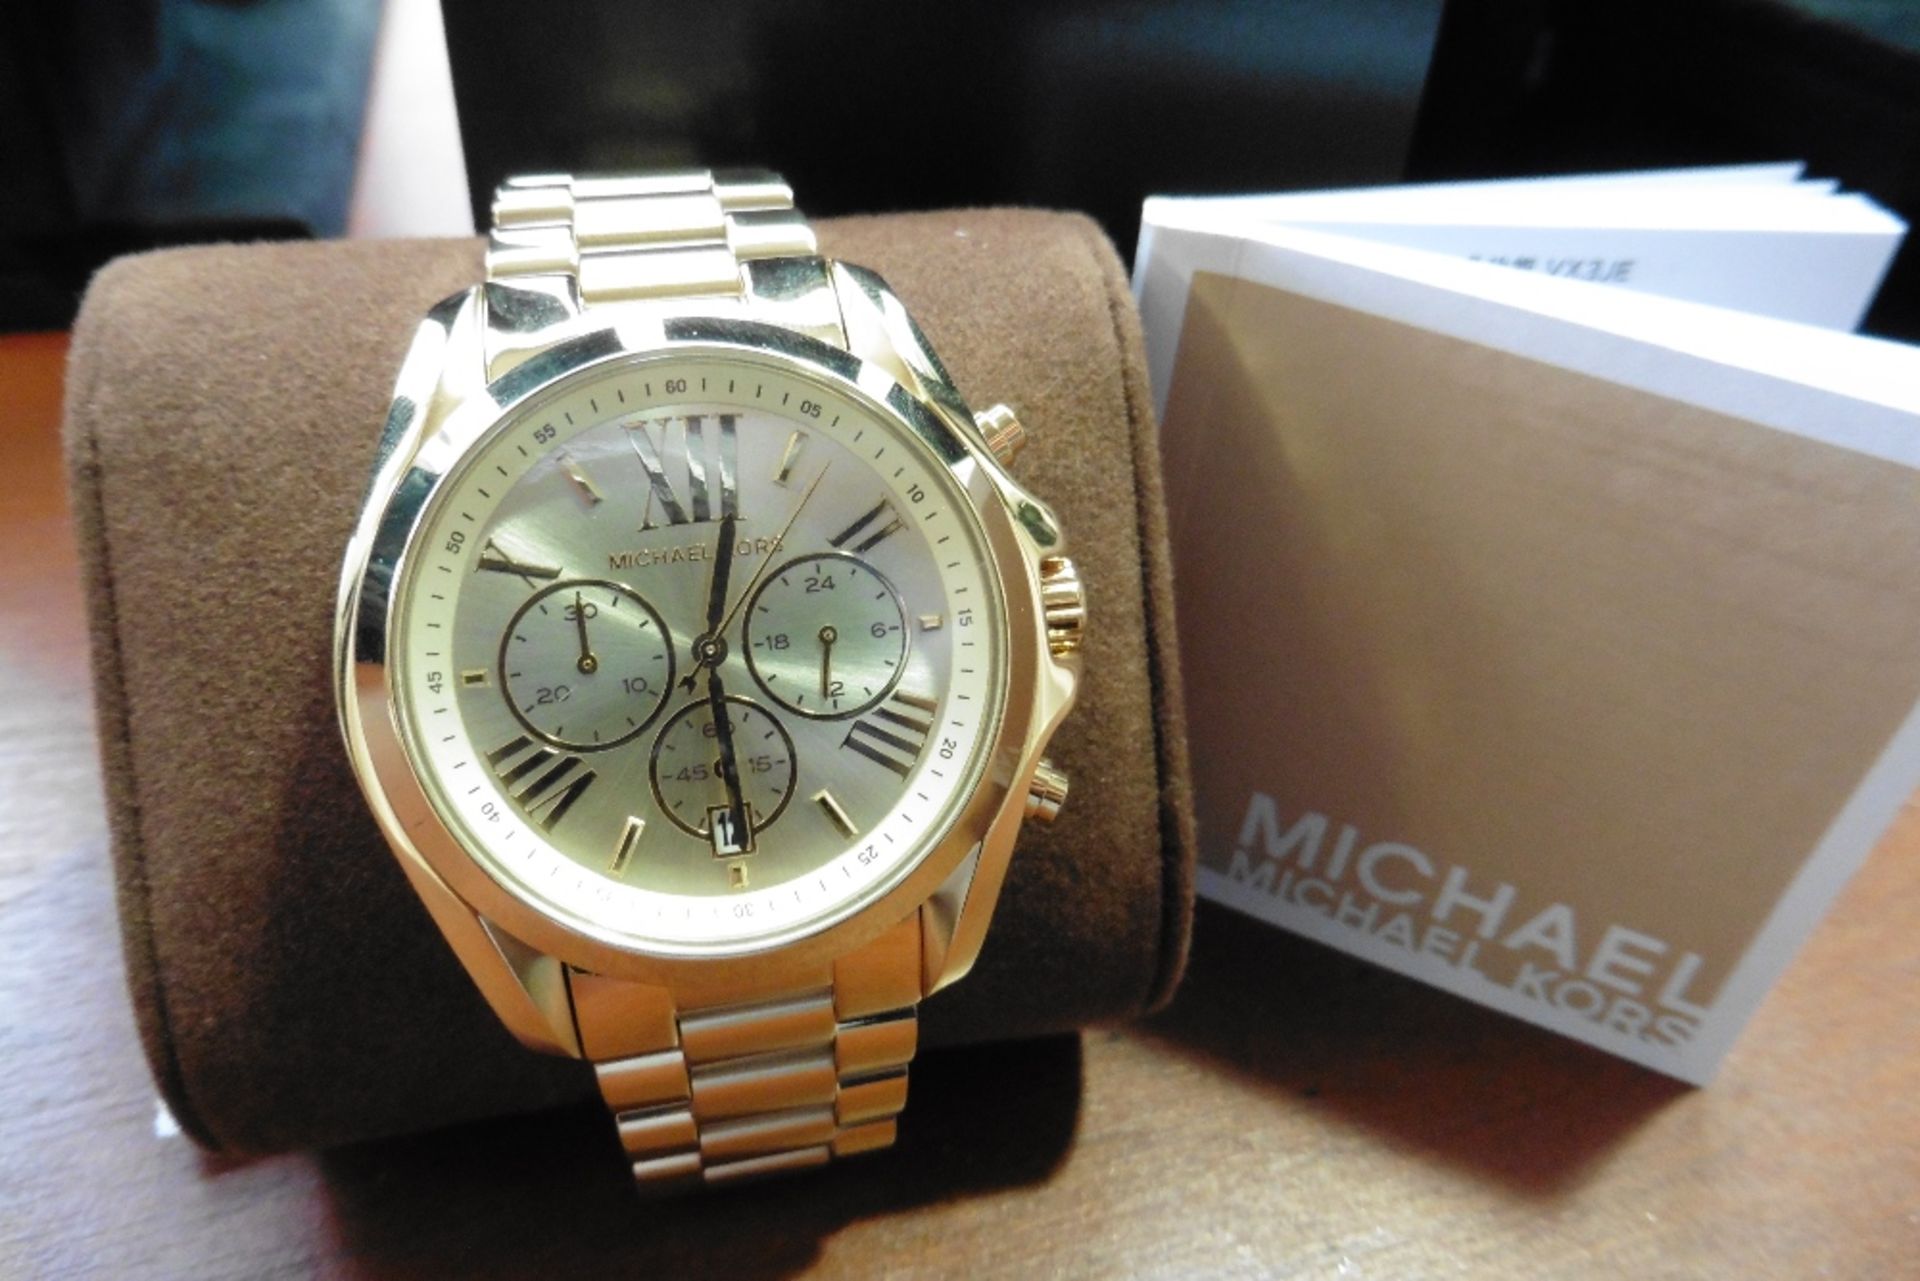 From the Bradshaw collection, this Michael Kors ladies watch, model number MK5605,  is made from